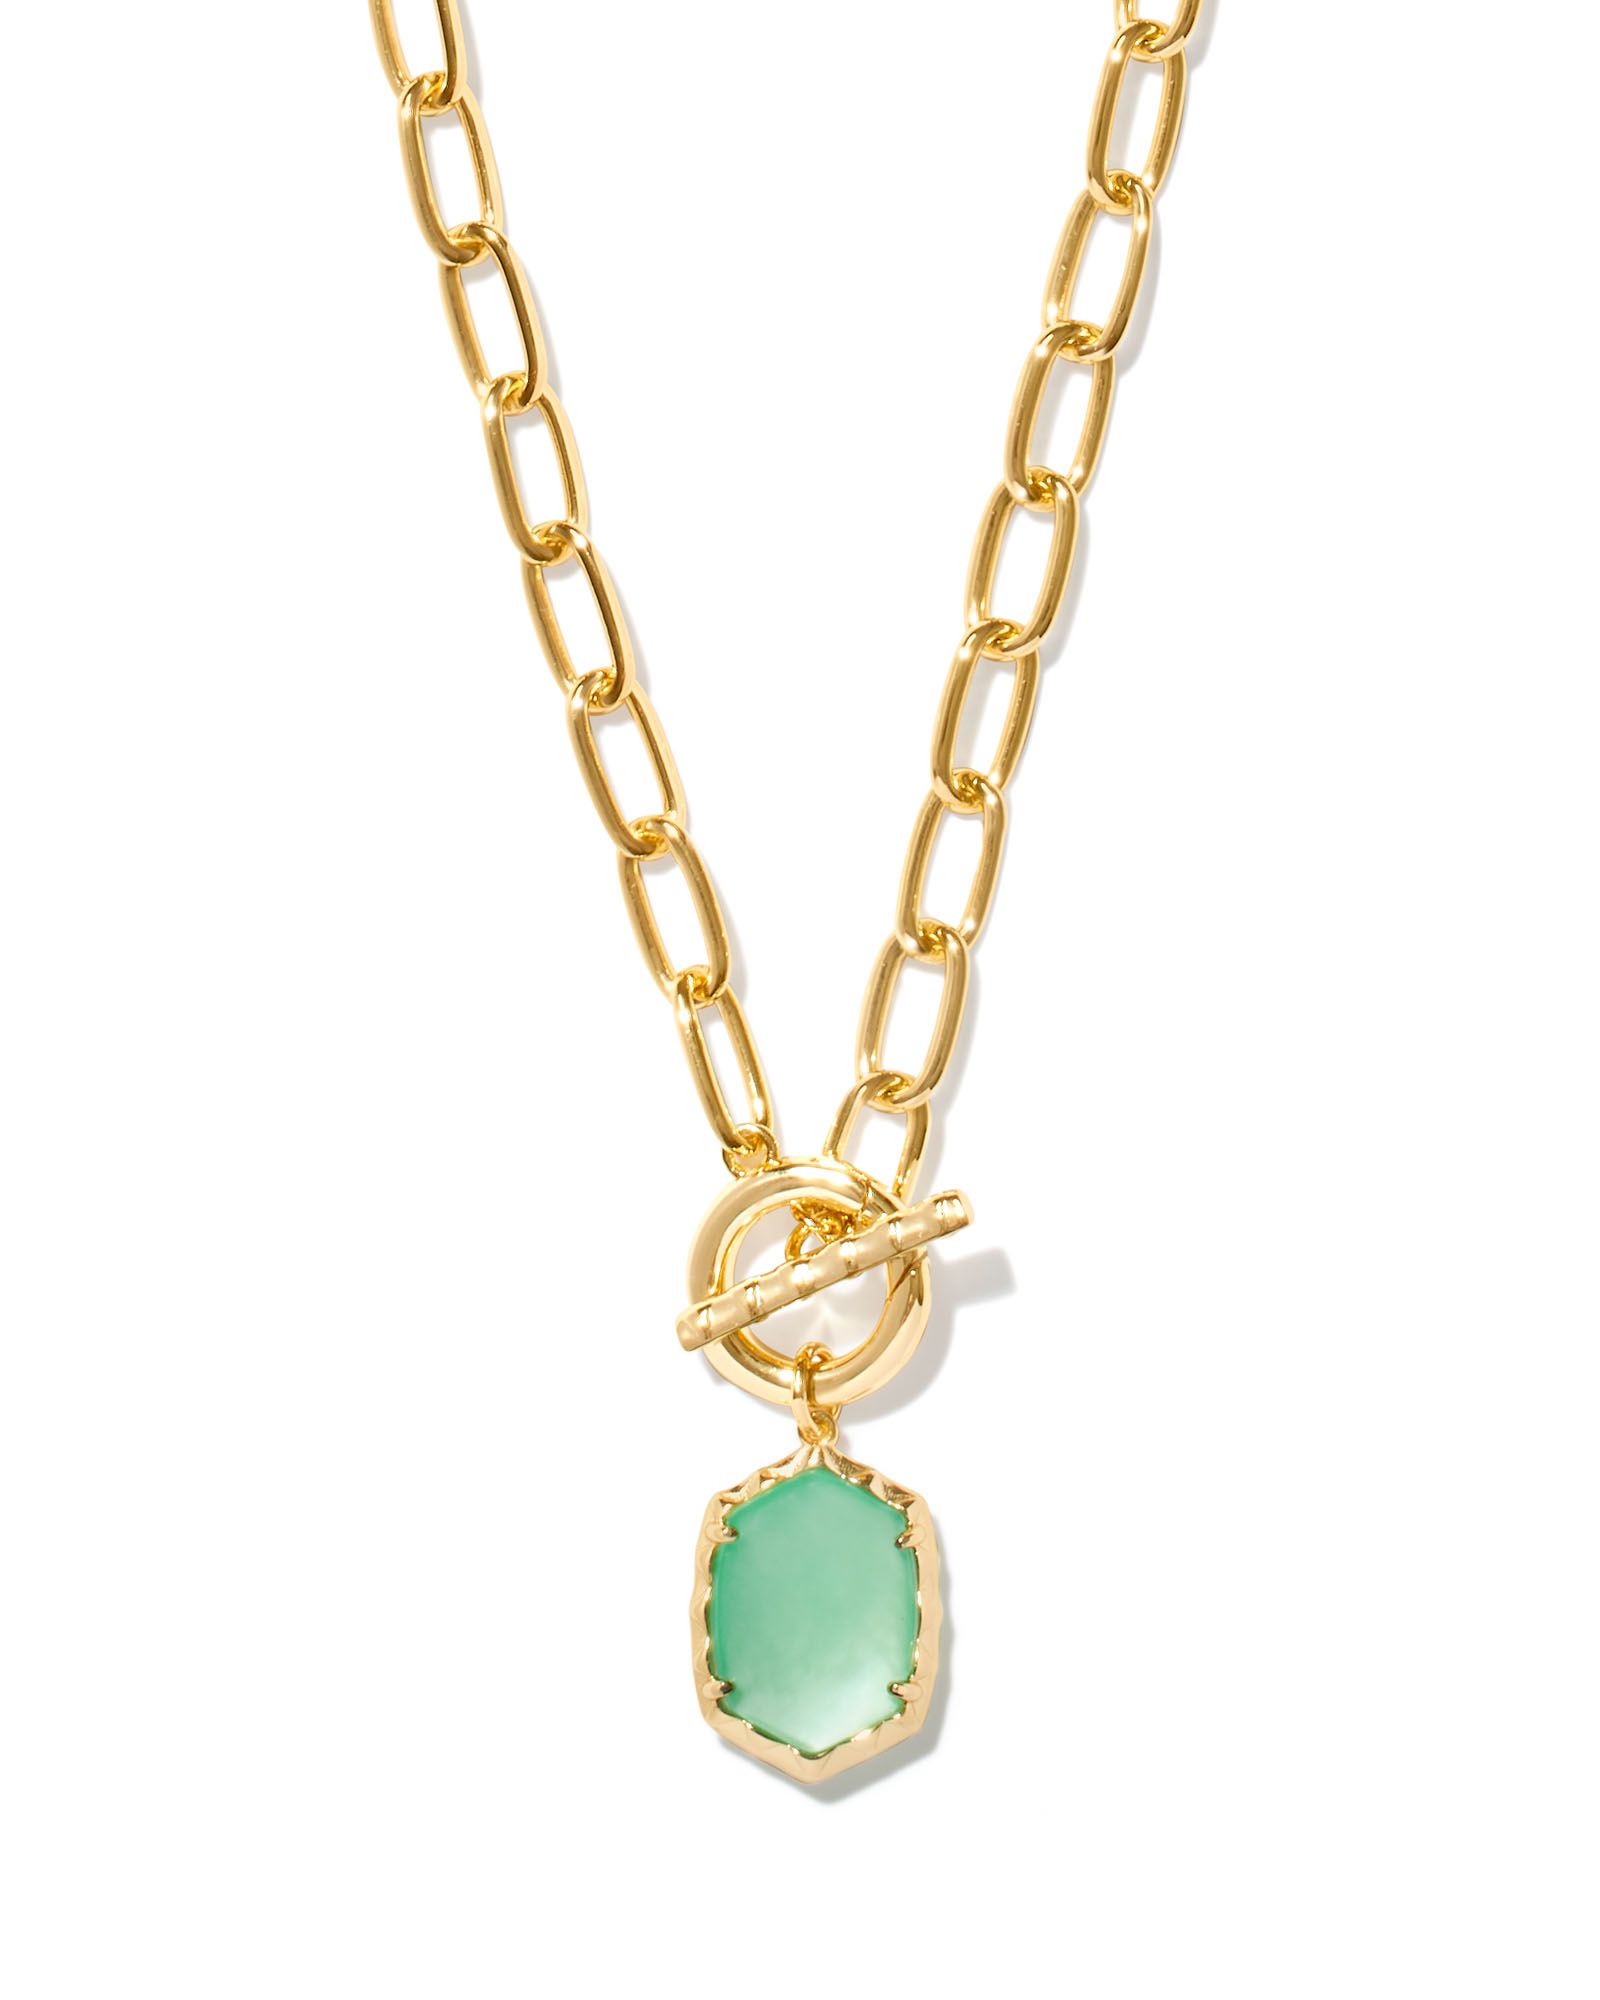 Daphne Convertible Gold Link and Chain Necklace in Light Green Mother-of-Pearl | Kendra Scott